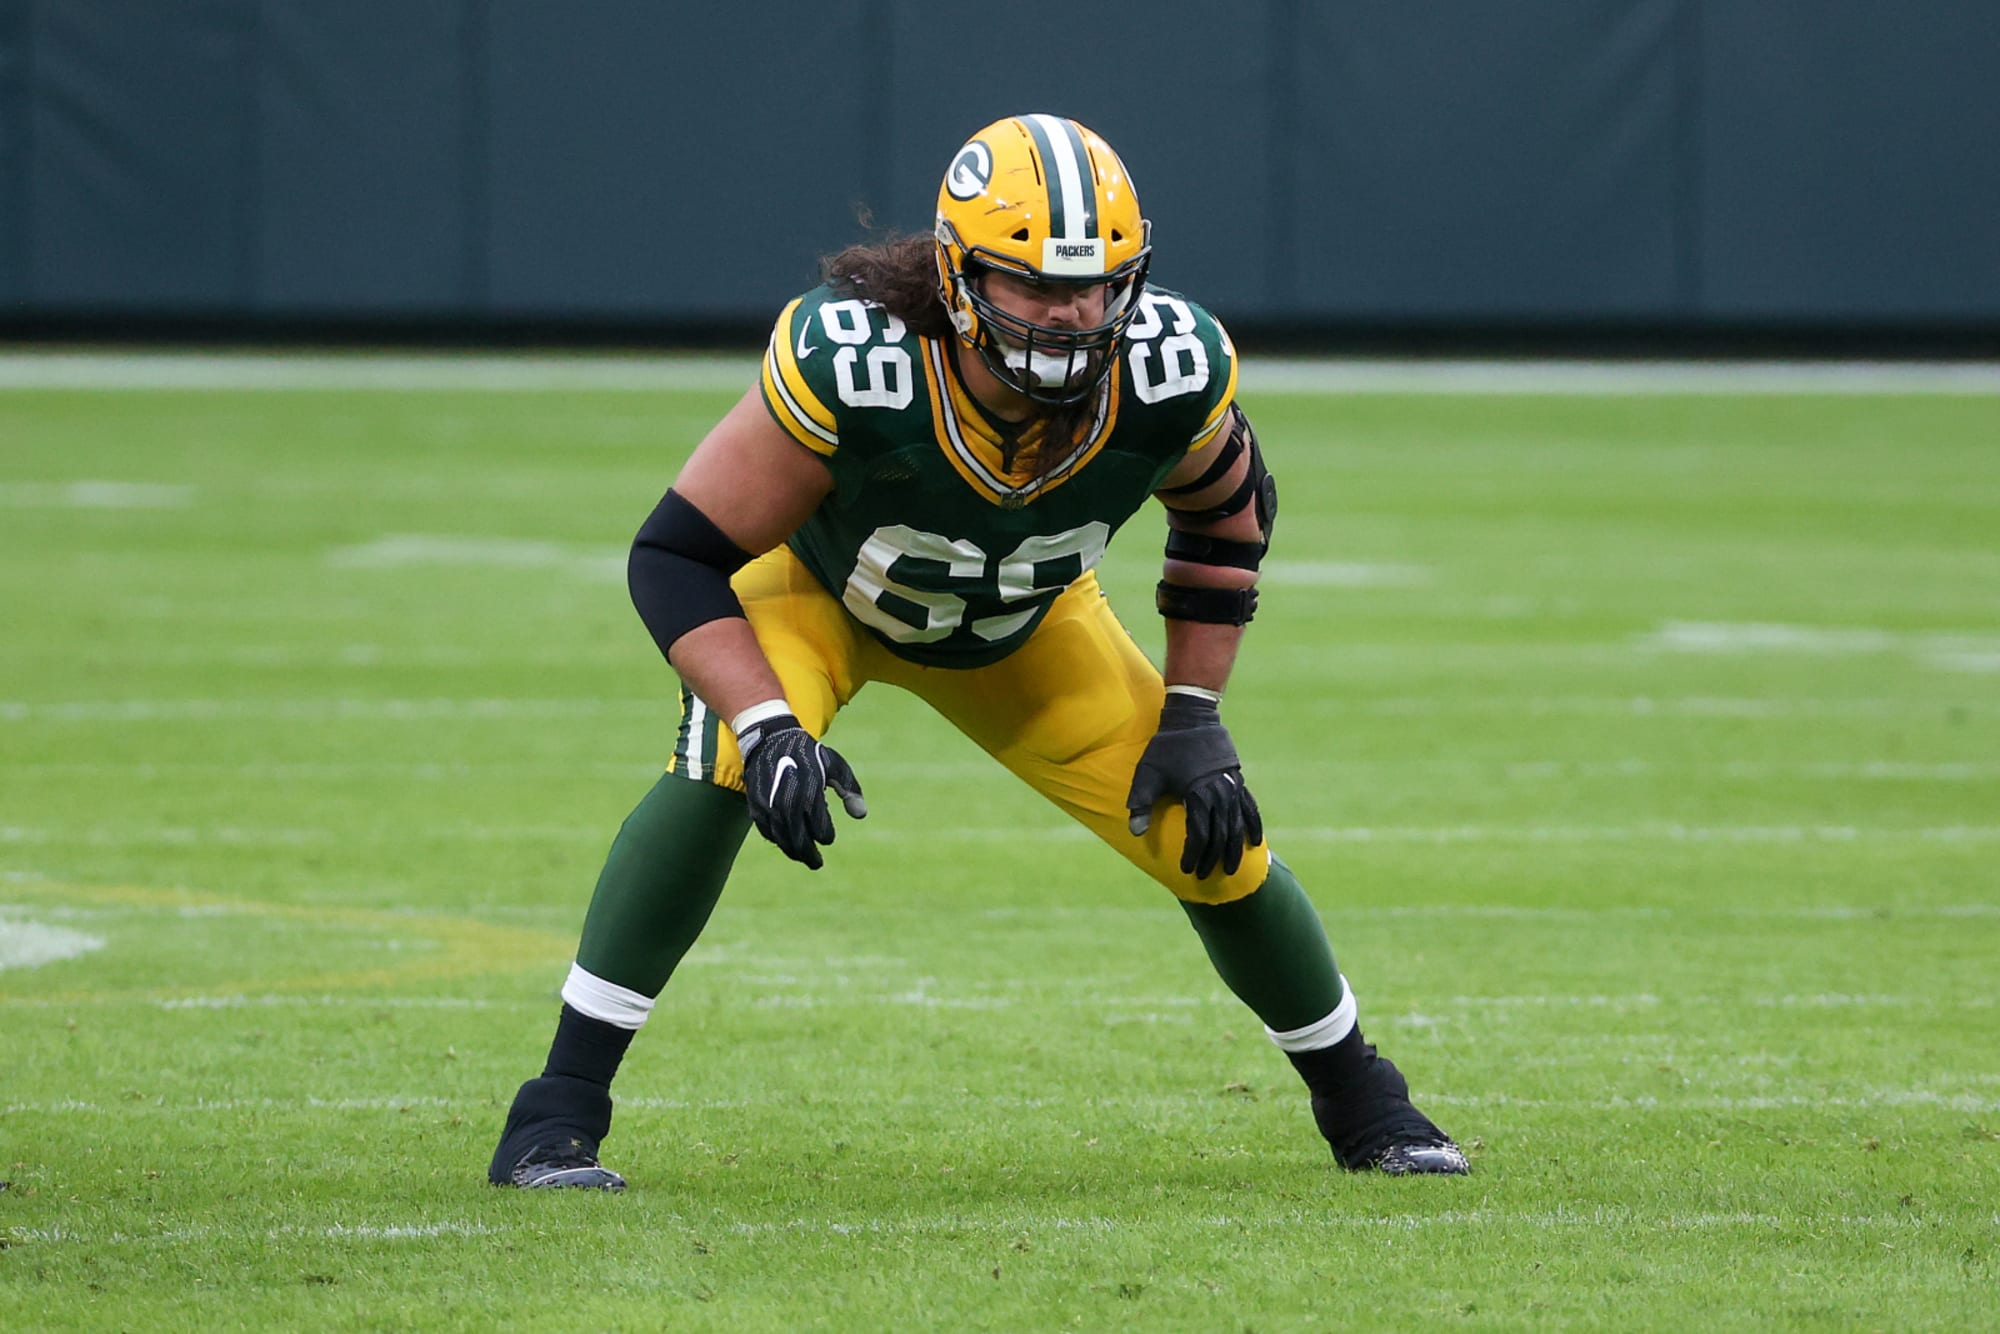 Packers: David Bakhtiari is the best left tackle in the NFL